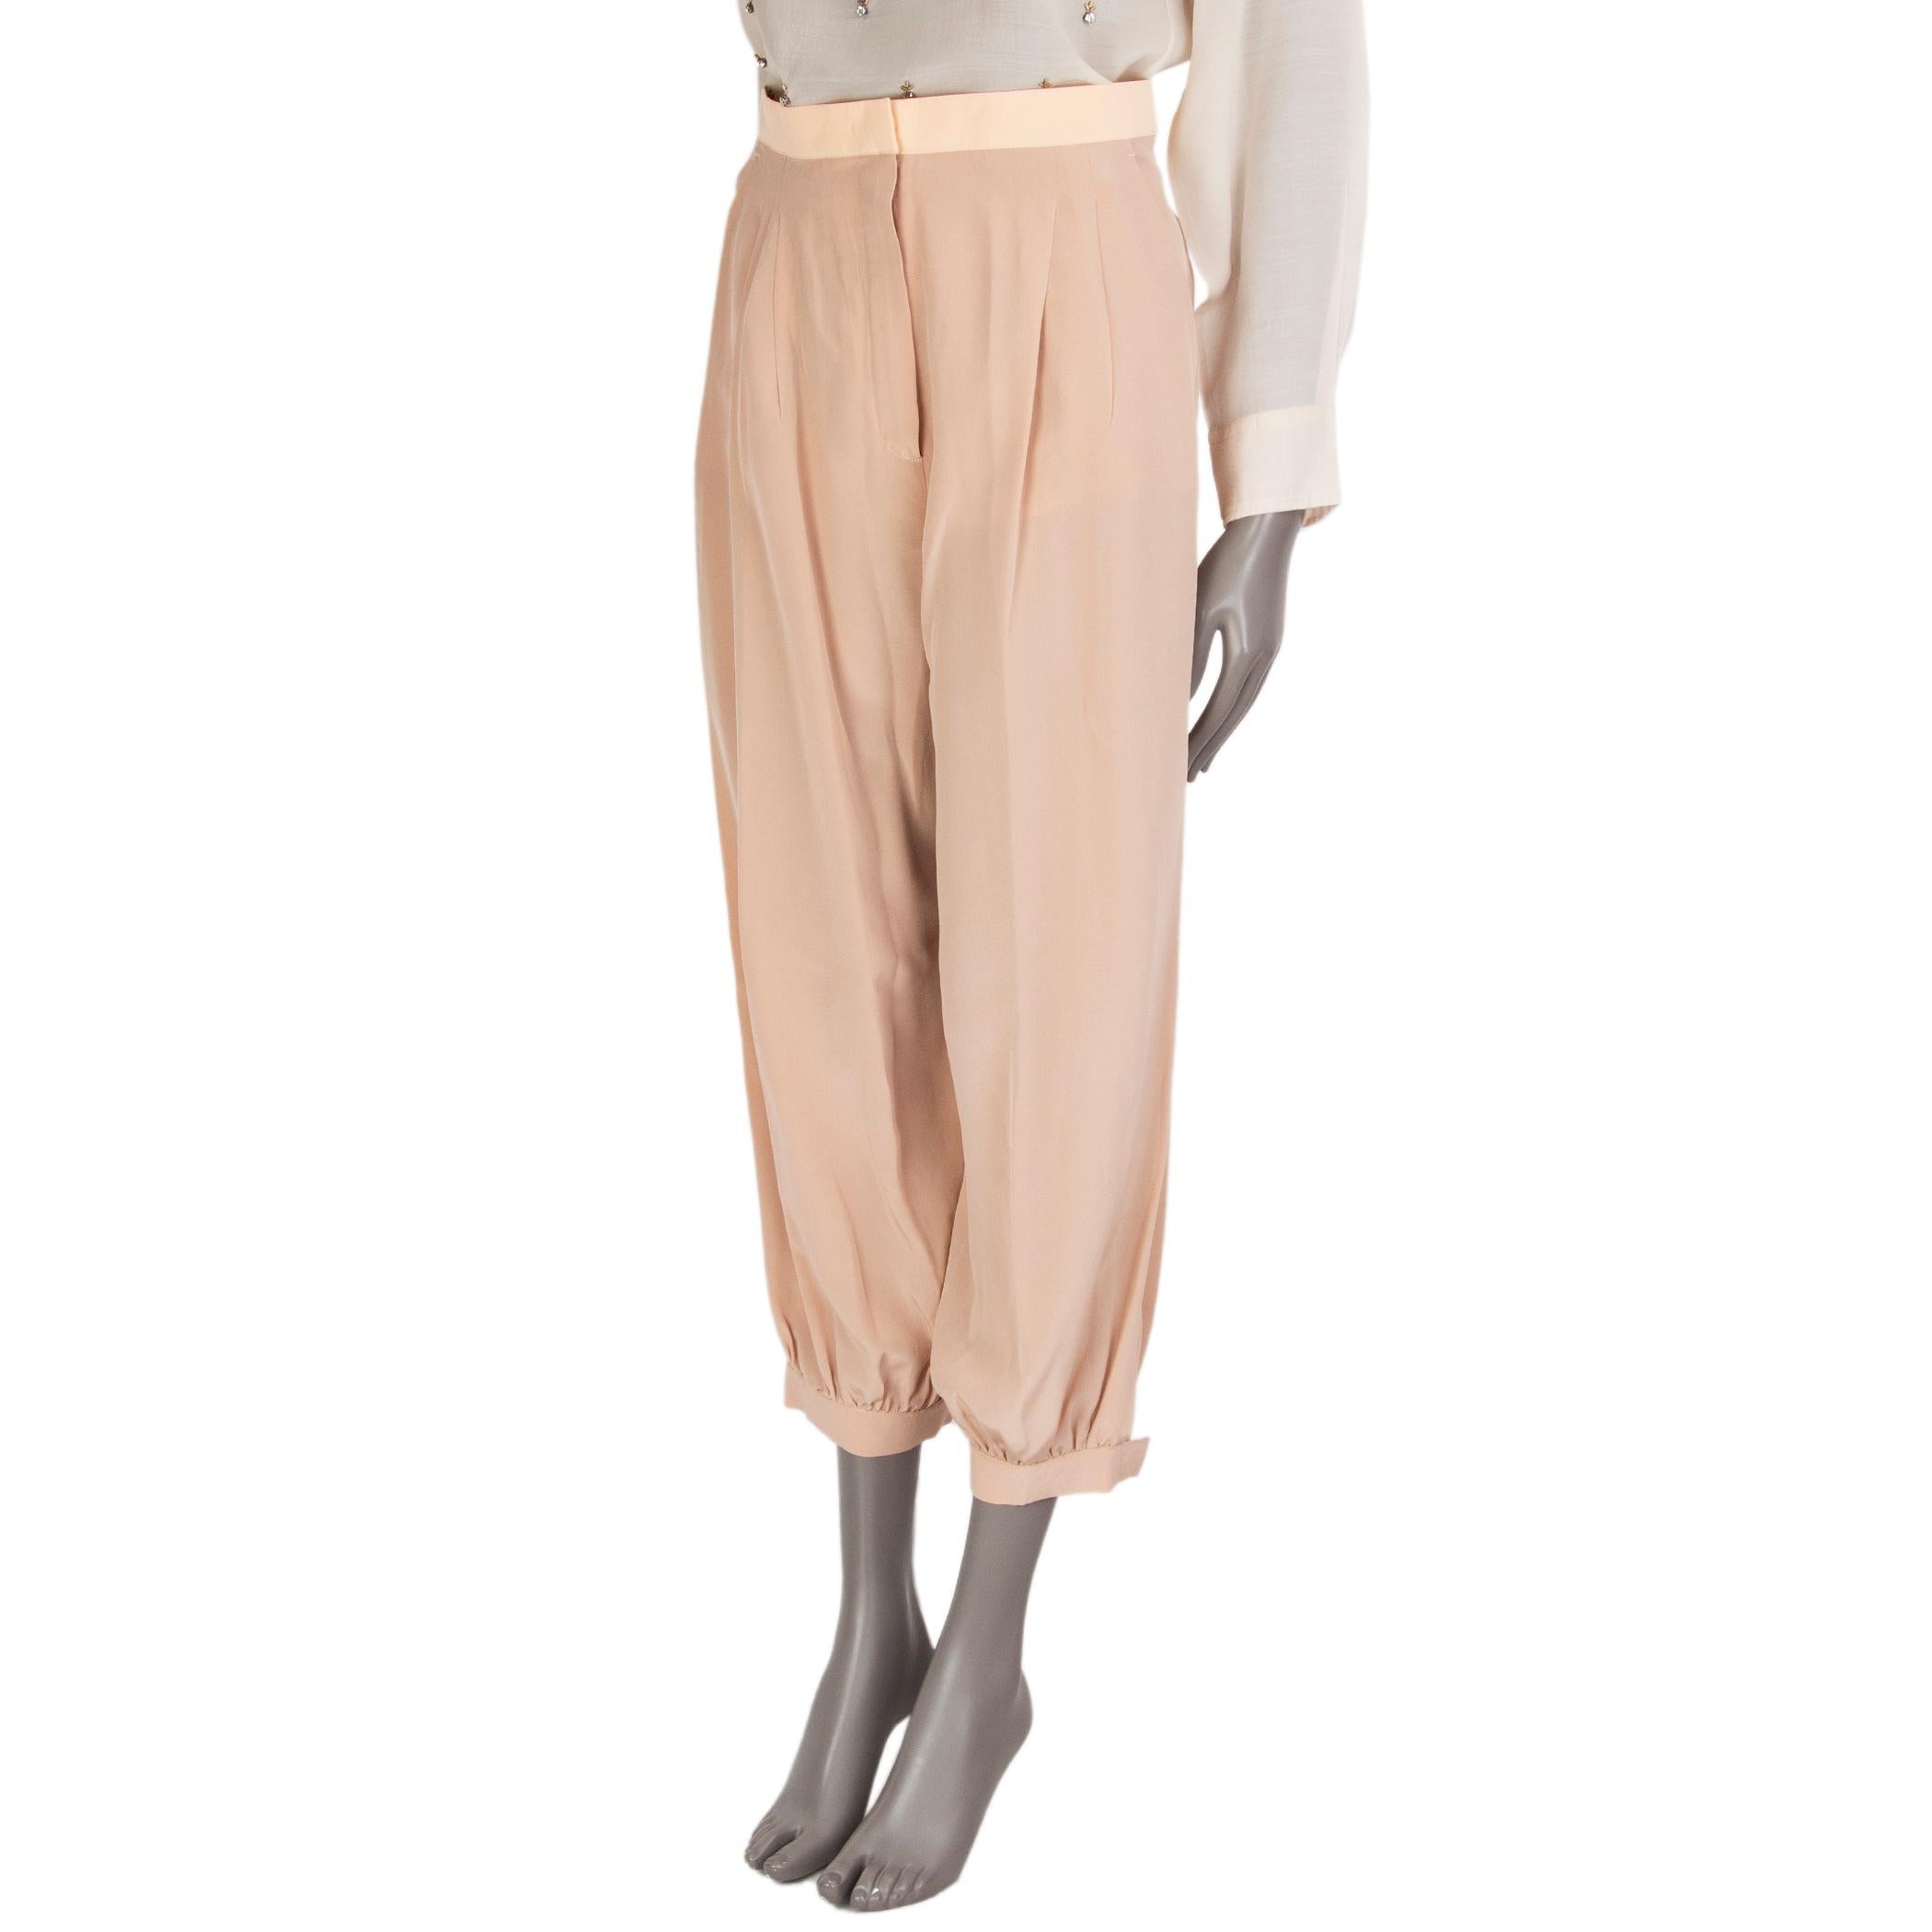 100% authentic Fendi harem pants in nude silk-blend (probably as content tag is missing) with two pockets on the front, two stitched welt-pockets on the back and buttoned slit cuffs. Close with a concealed zipper, a hook and a jigger-button.